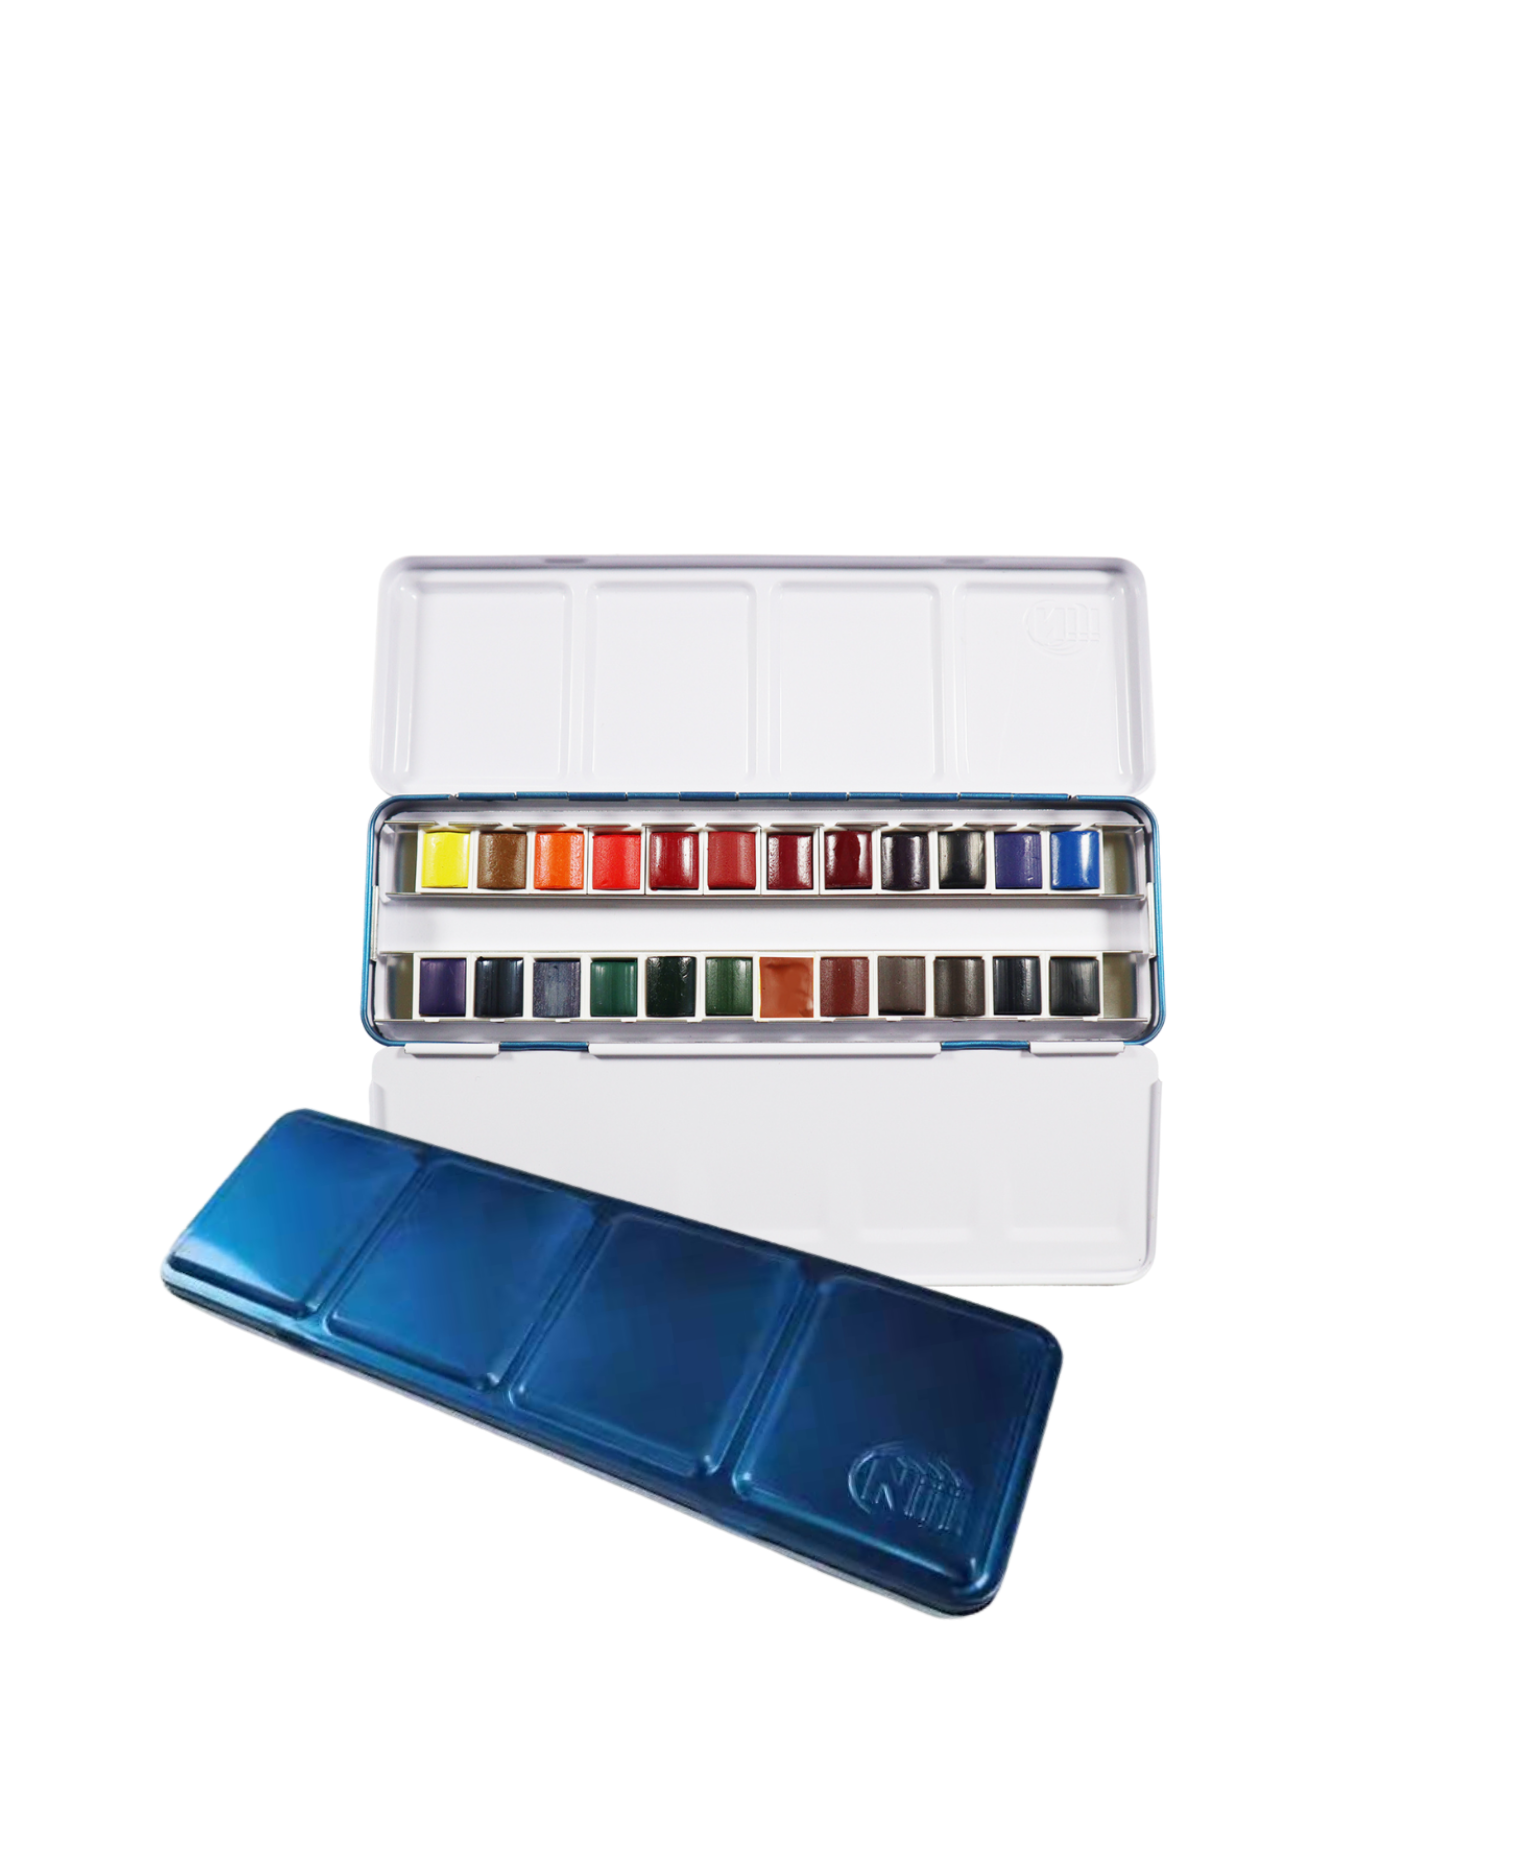 12 Color Traditional Japanese Watercolor Set in Porcelain Dishes, Larg –  Yasutomo